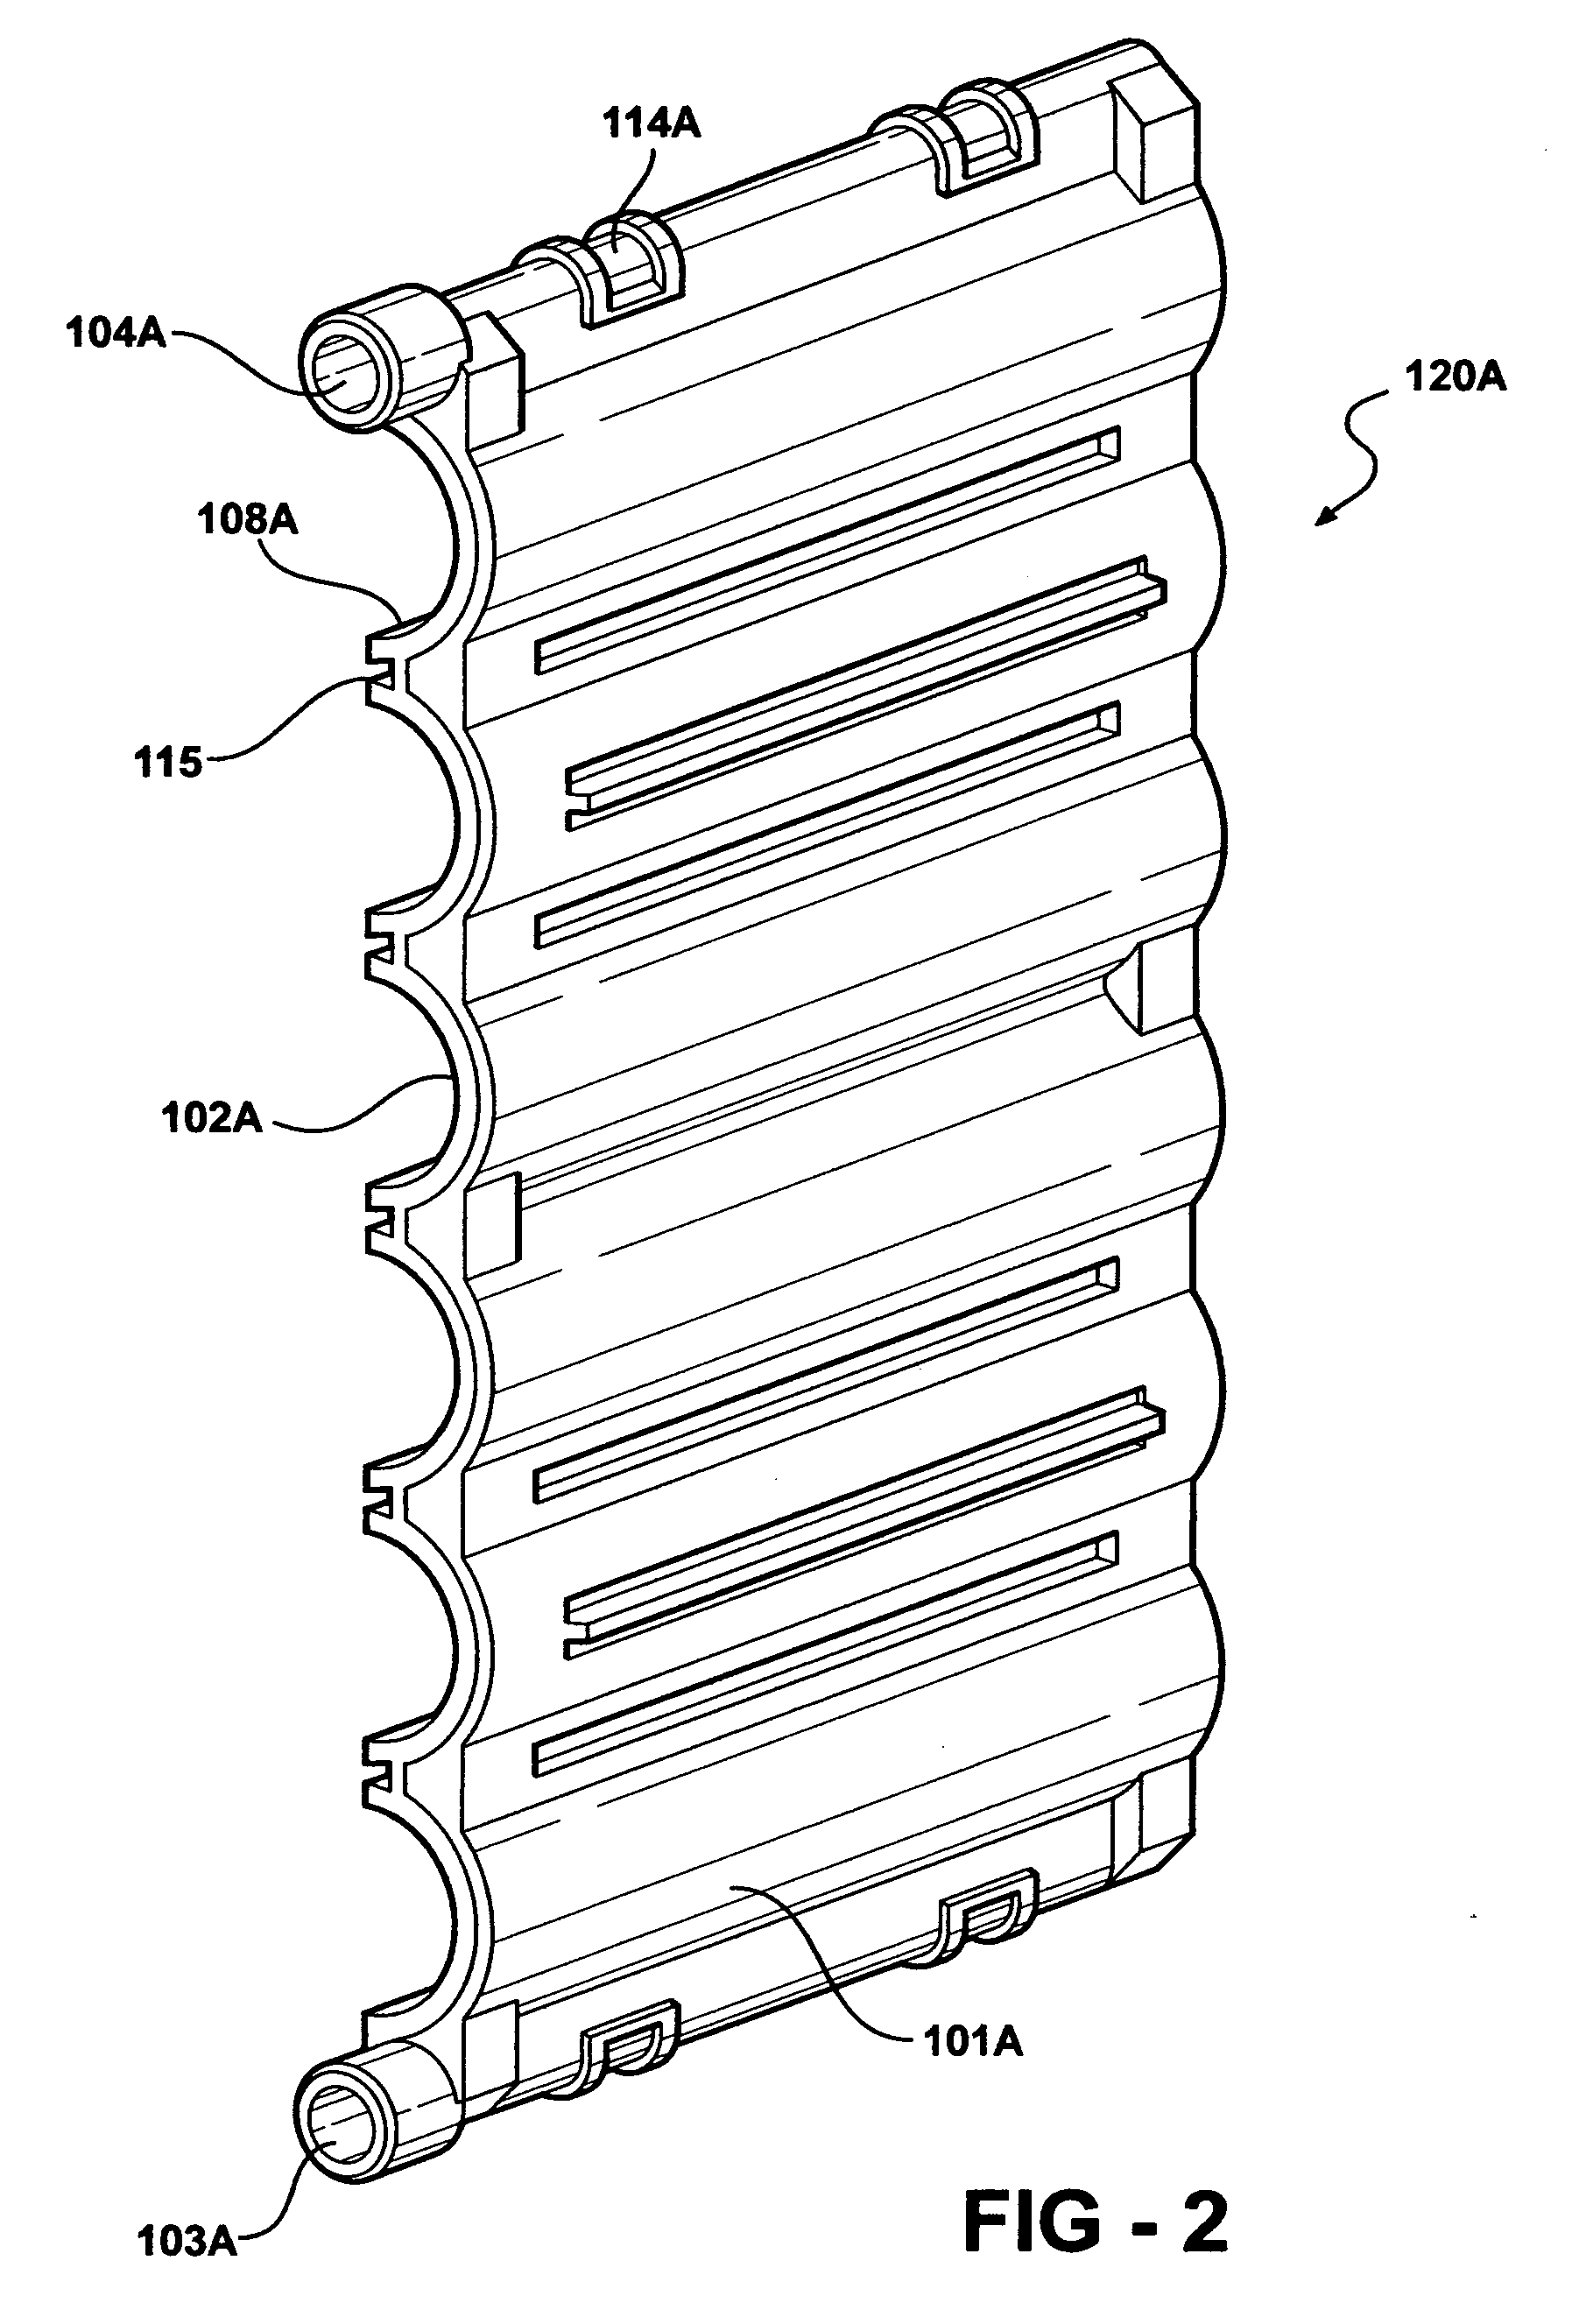 Device for housing electrochemical cells